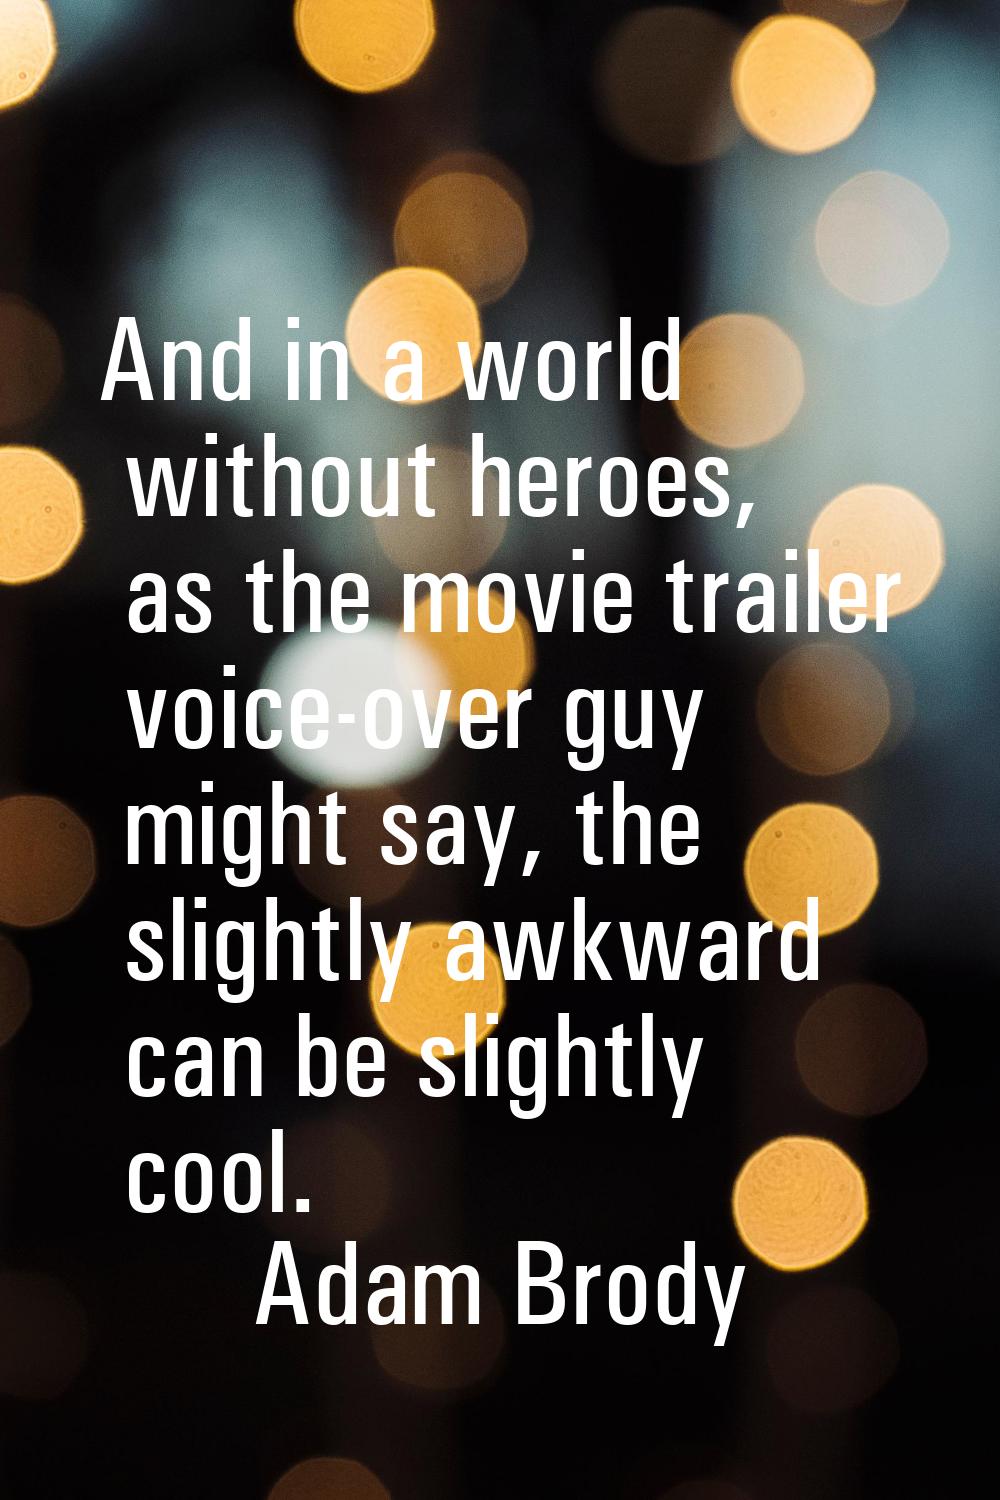 And in a world without heroes, as the movie trailer voice-over guy might say, the slightly awkward 